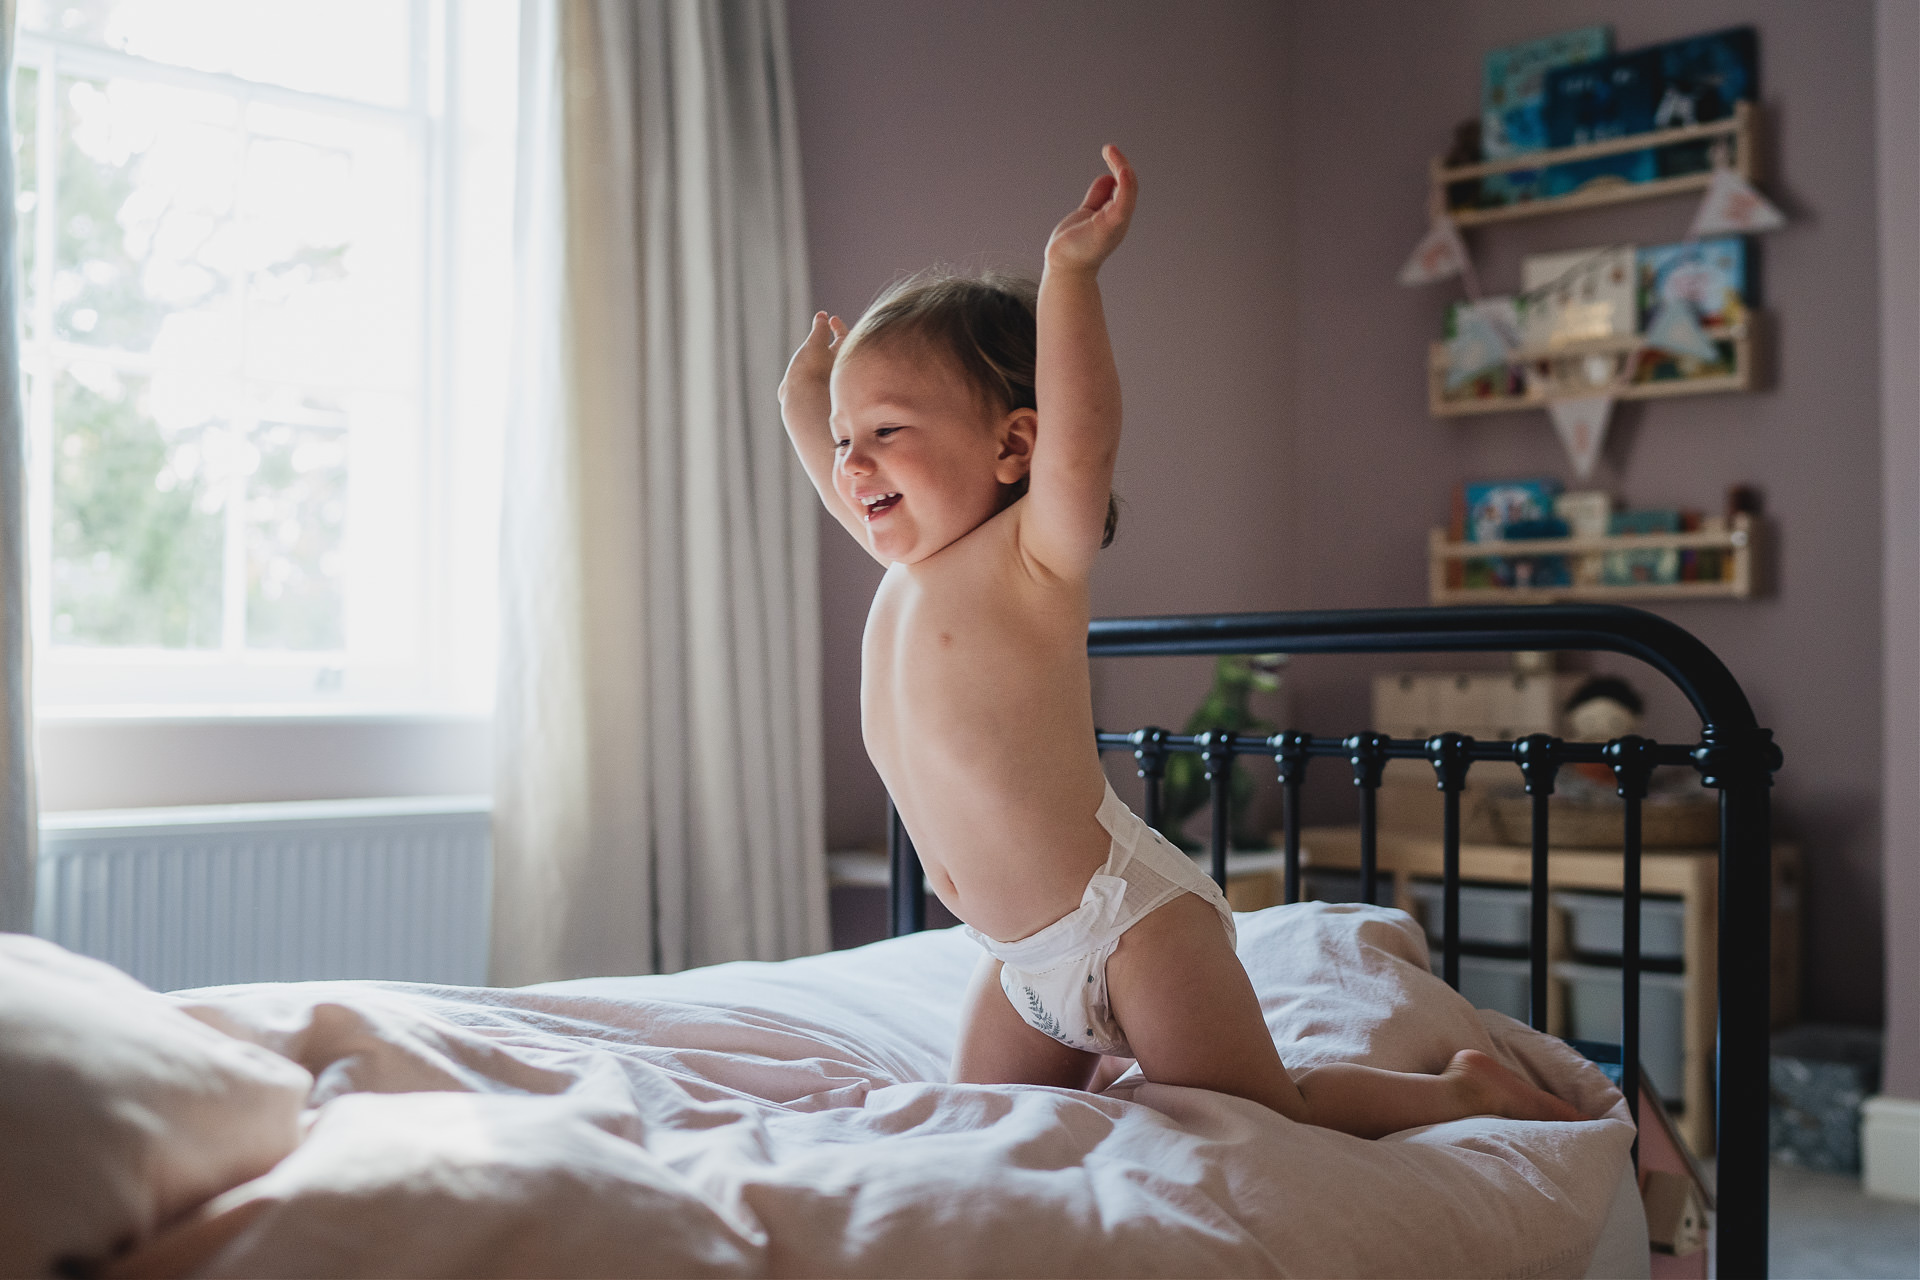 A young toddler playing on a bed